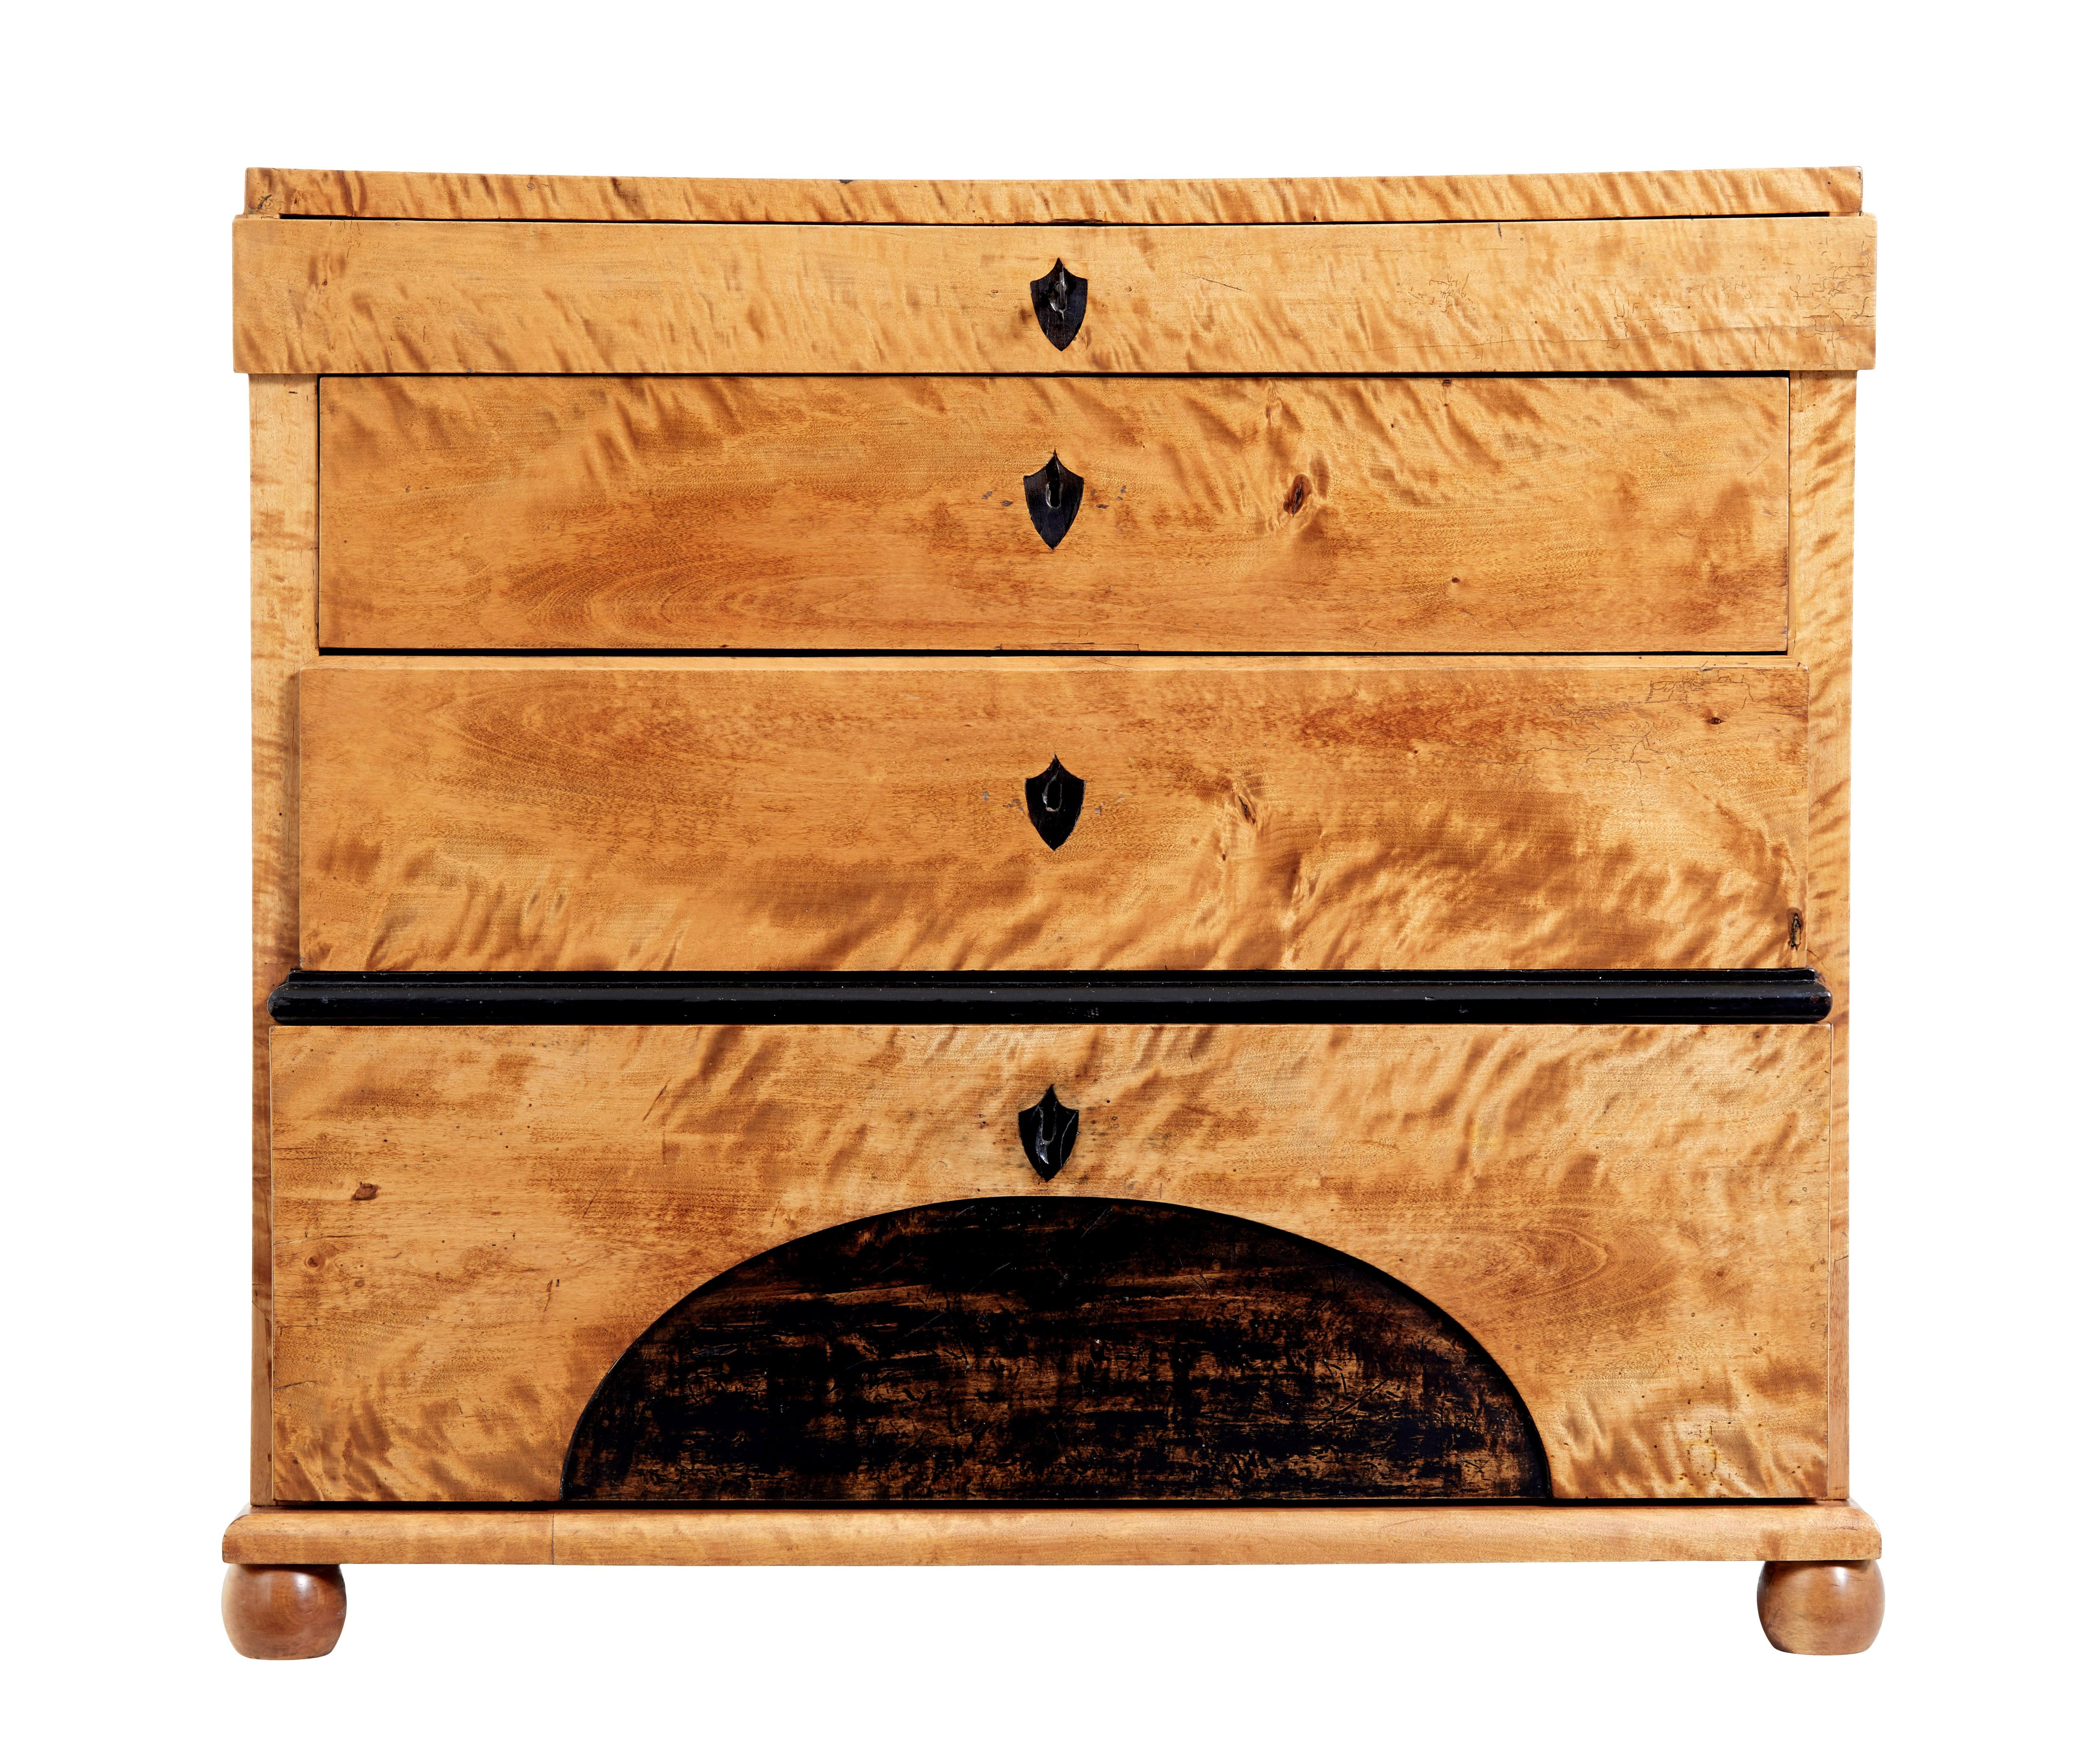 19th century biedermeier birch chest of drawers circa 1830.

Swedish biedermeier commode with plenty of character.

Fitted with 4 drawers of various dimensions.  Top drawer forming part of the stepped detail below the top surface.  Further